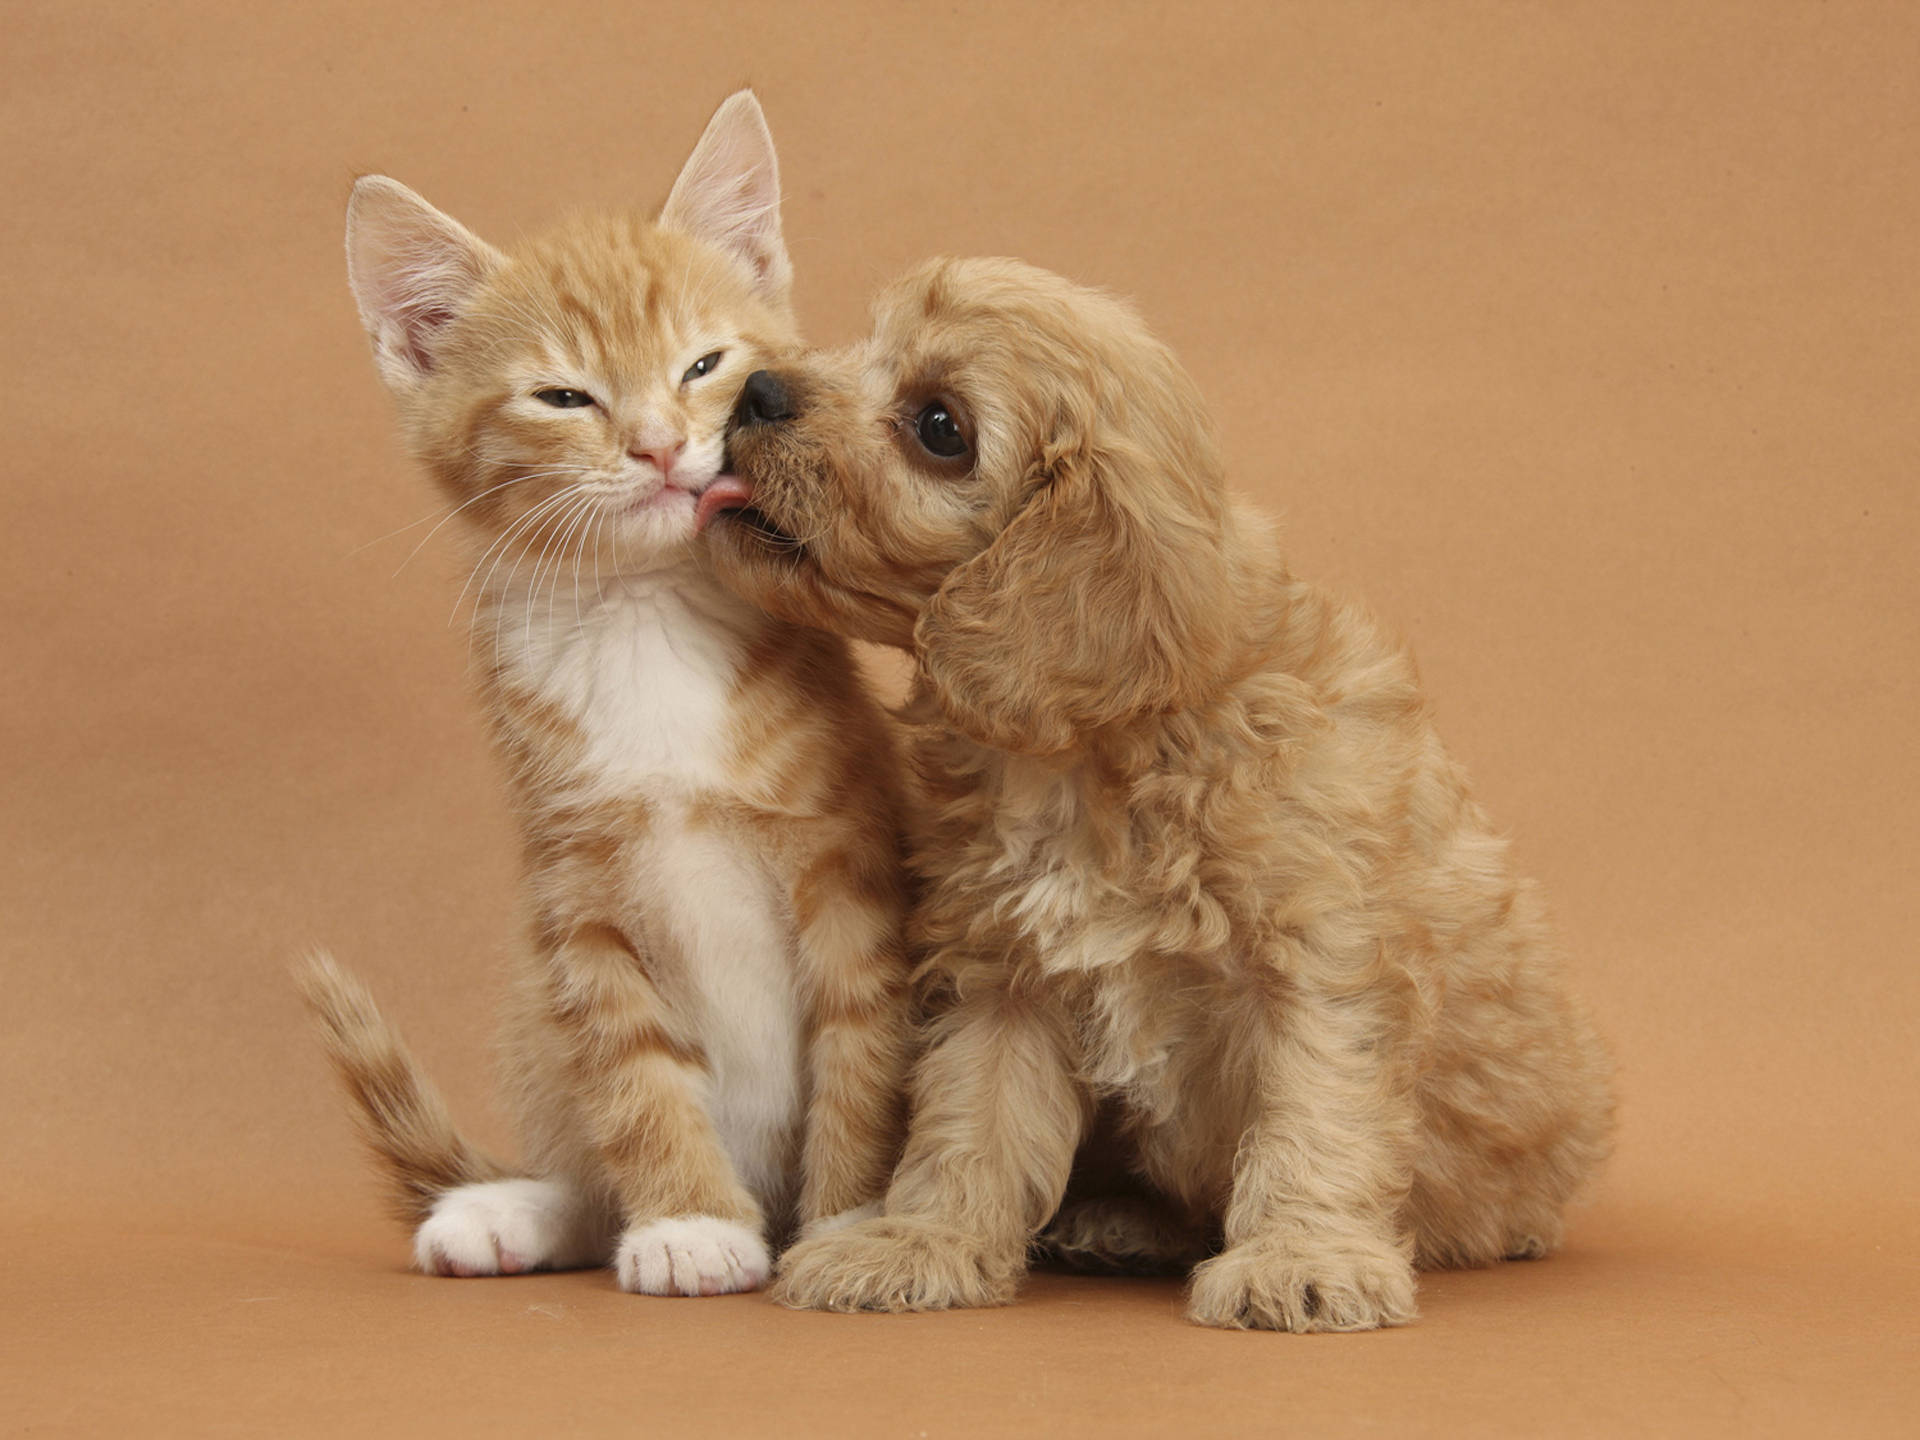 A Dog and Cat Sharing a Sweet Moment Wallpaper